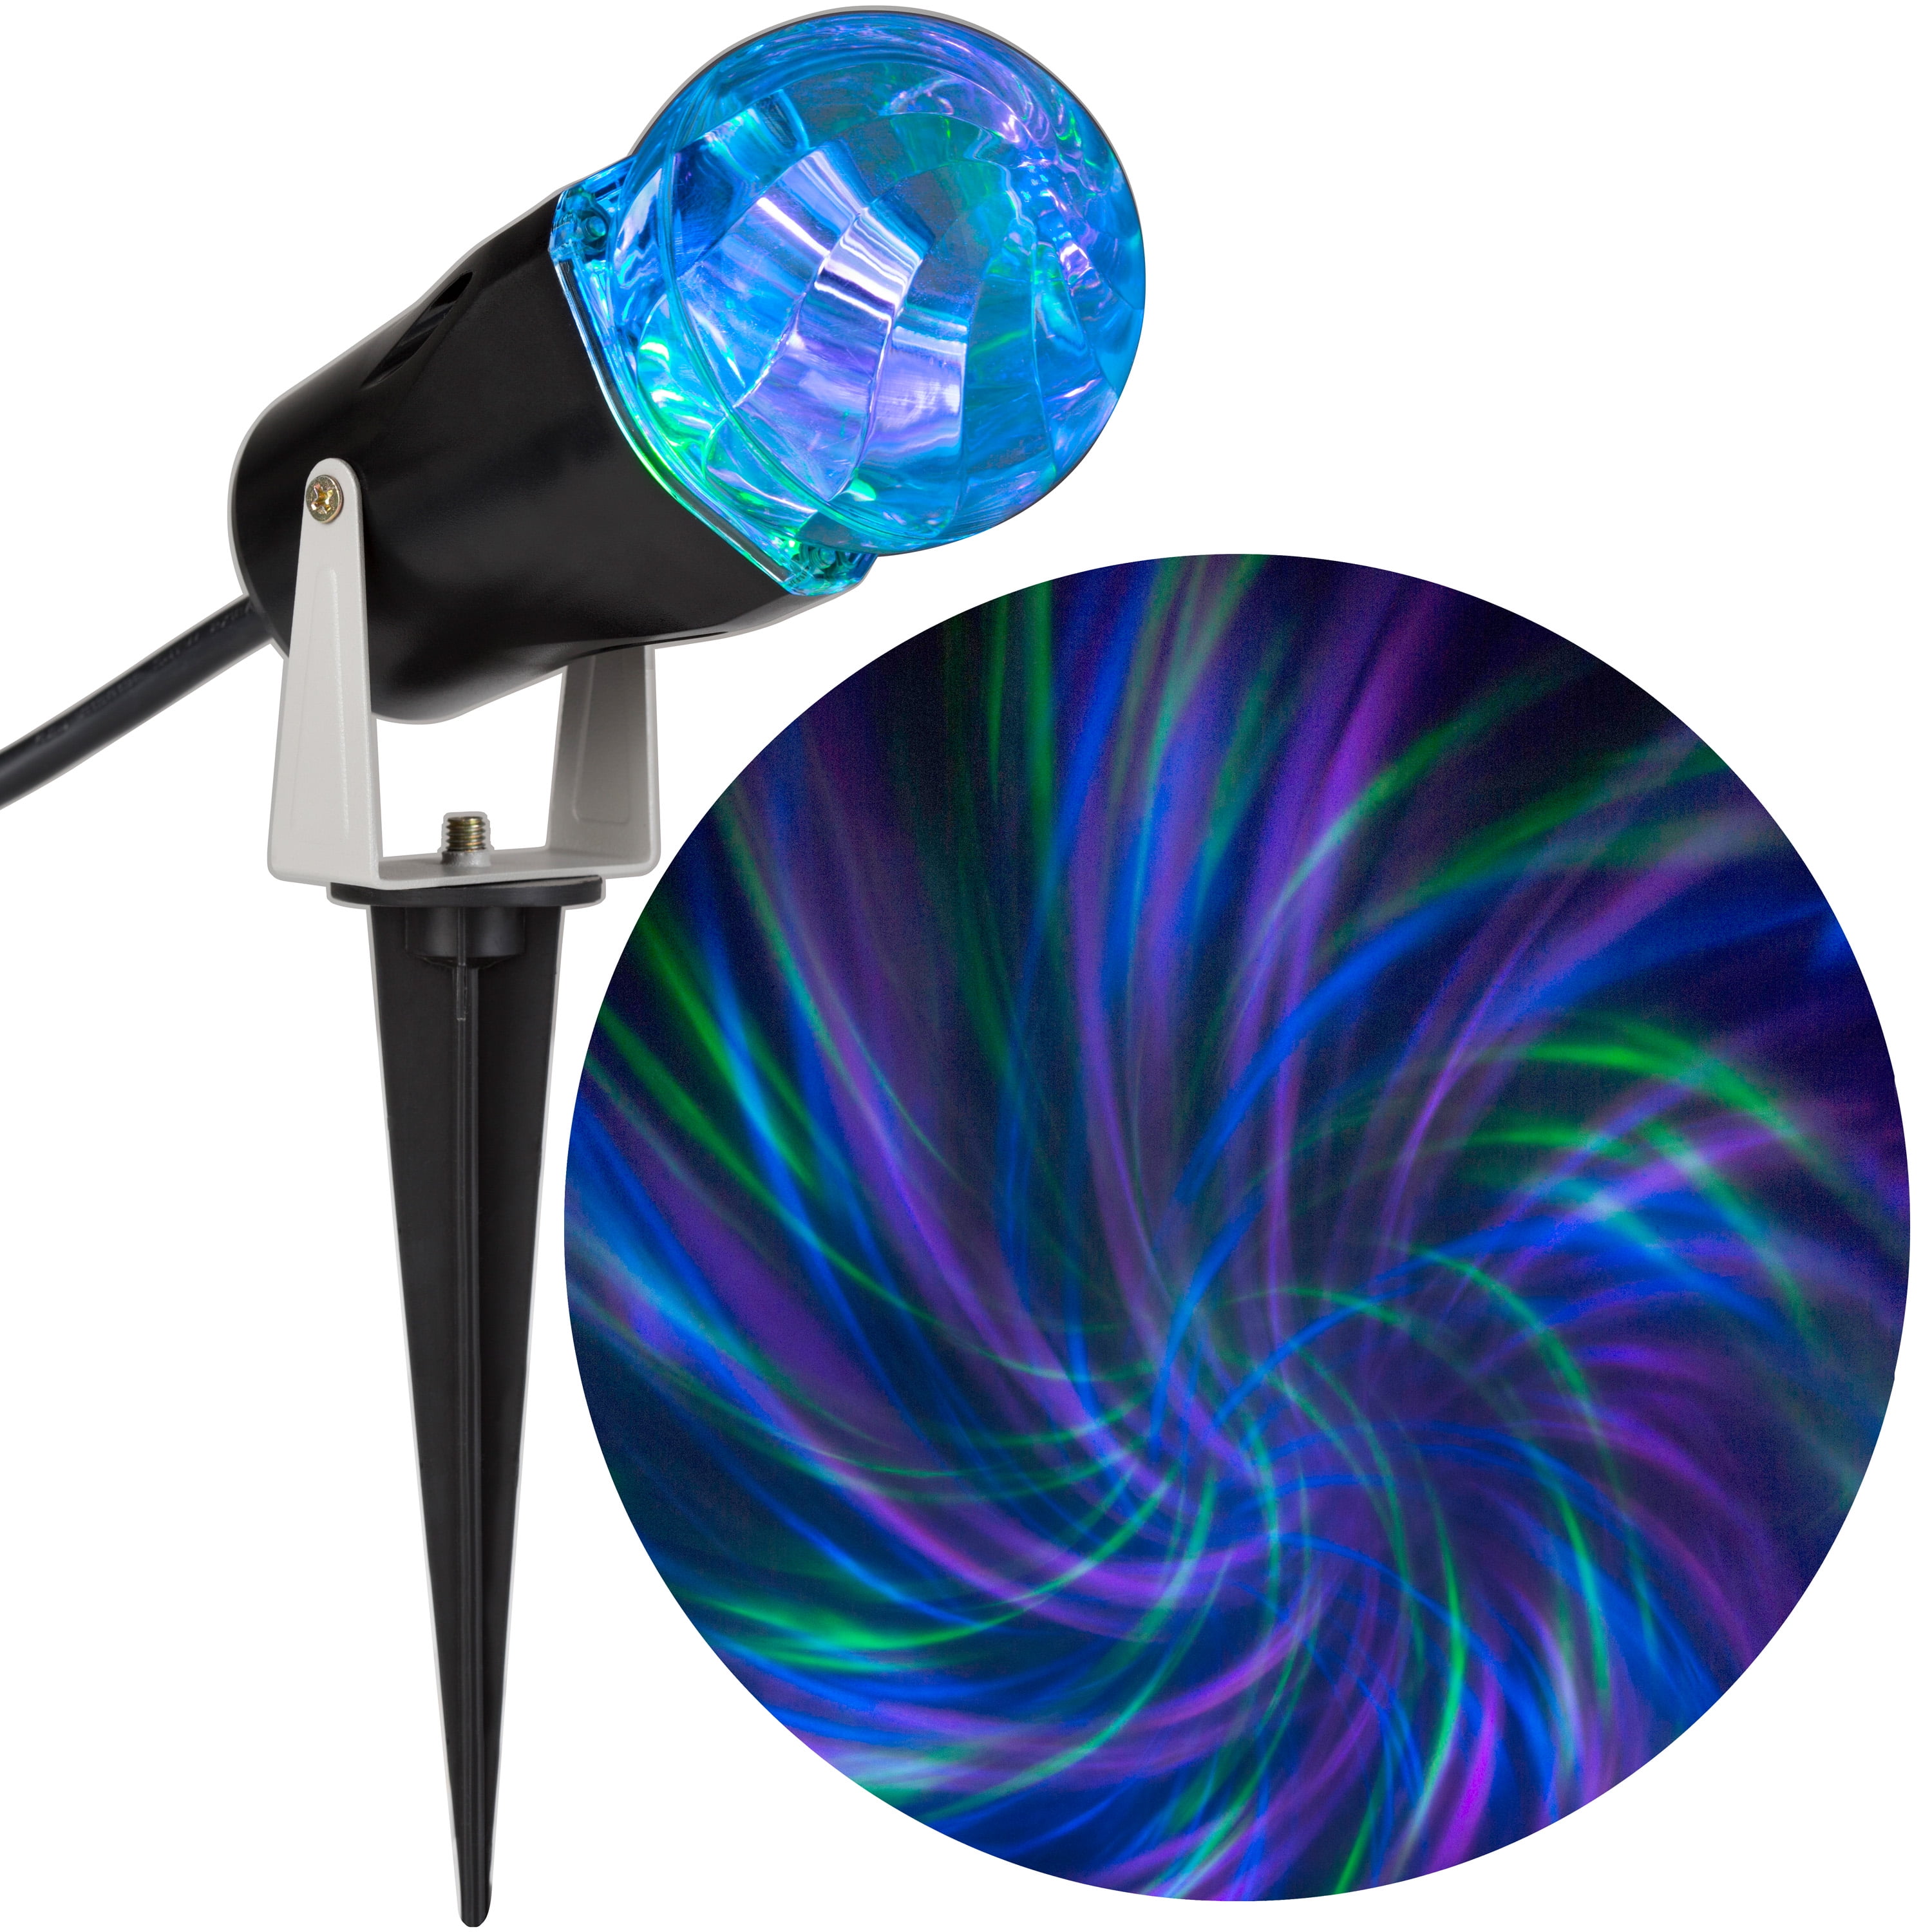 Gemmy Lightshow Stake Projection Kaleidoscope Spot Light For Christmas Holiday 